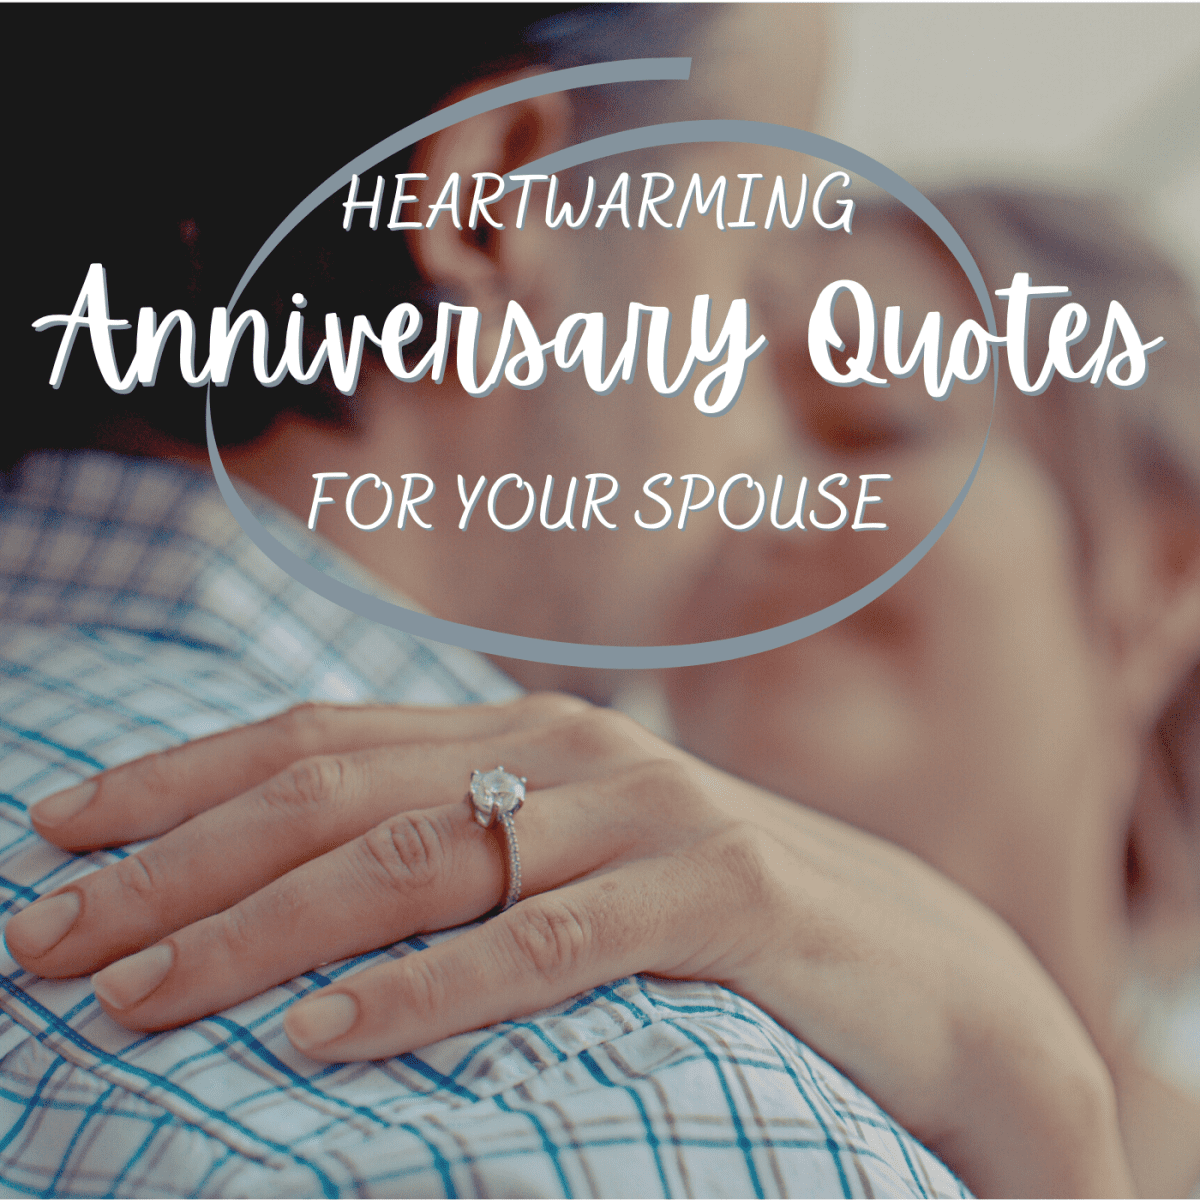 40th Wedding Anniversary Quotes and Wishes That Celebrate Love